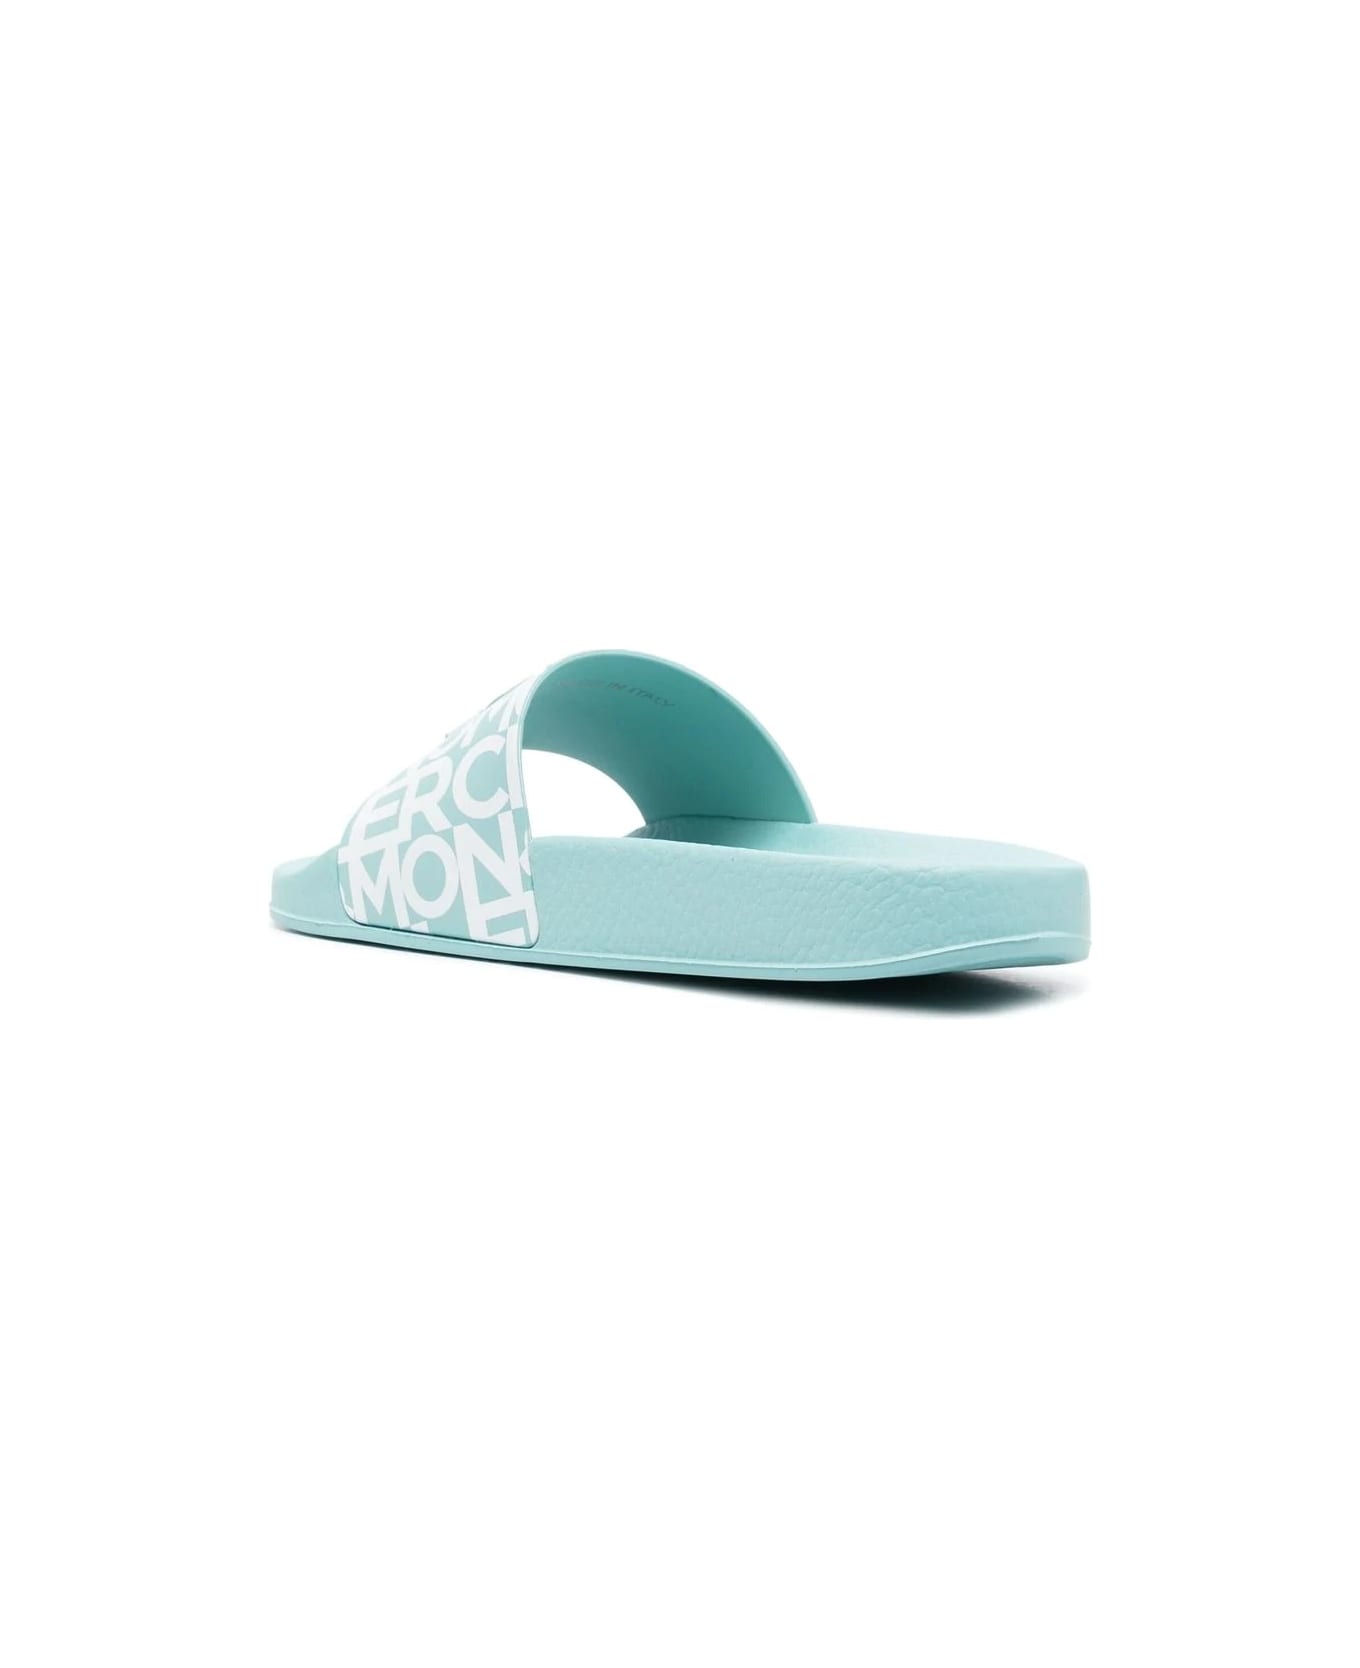 Moncler Acquamarie Jeanne Slippers - Blue サンダル